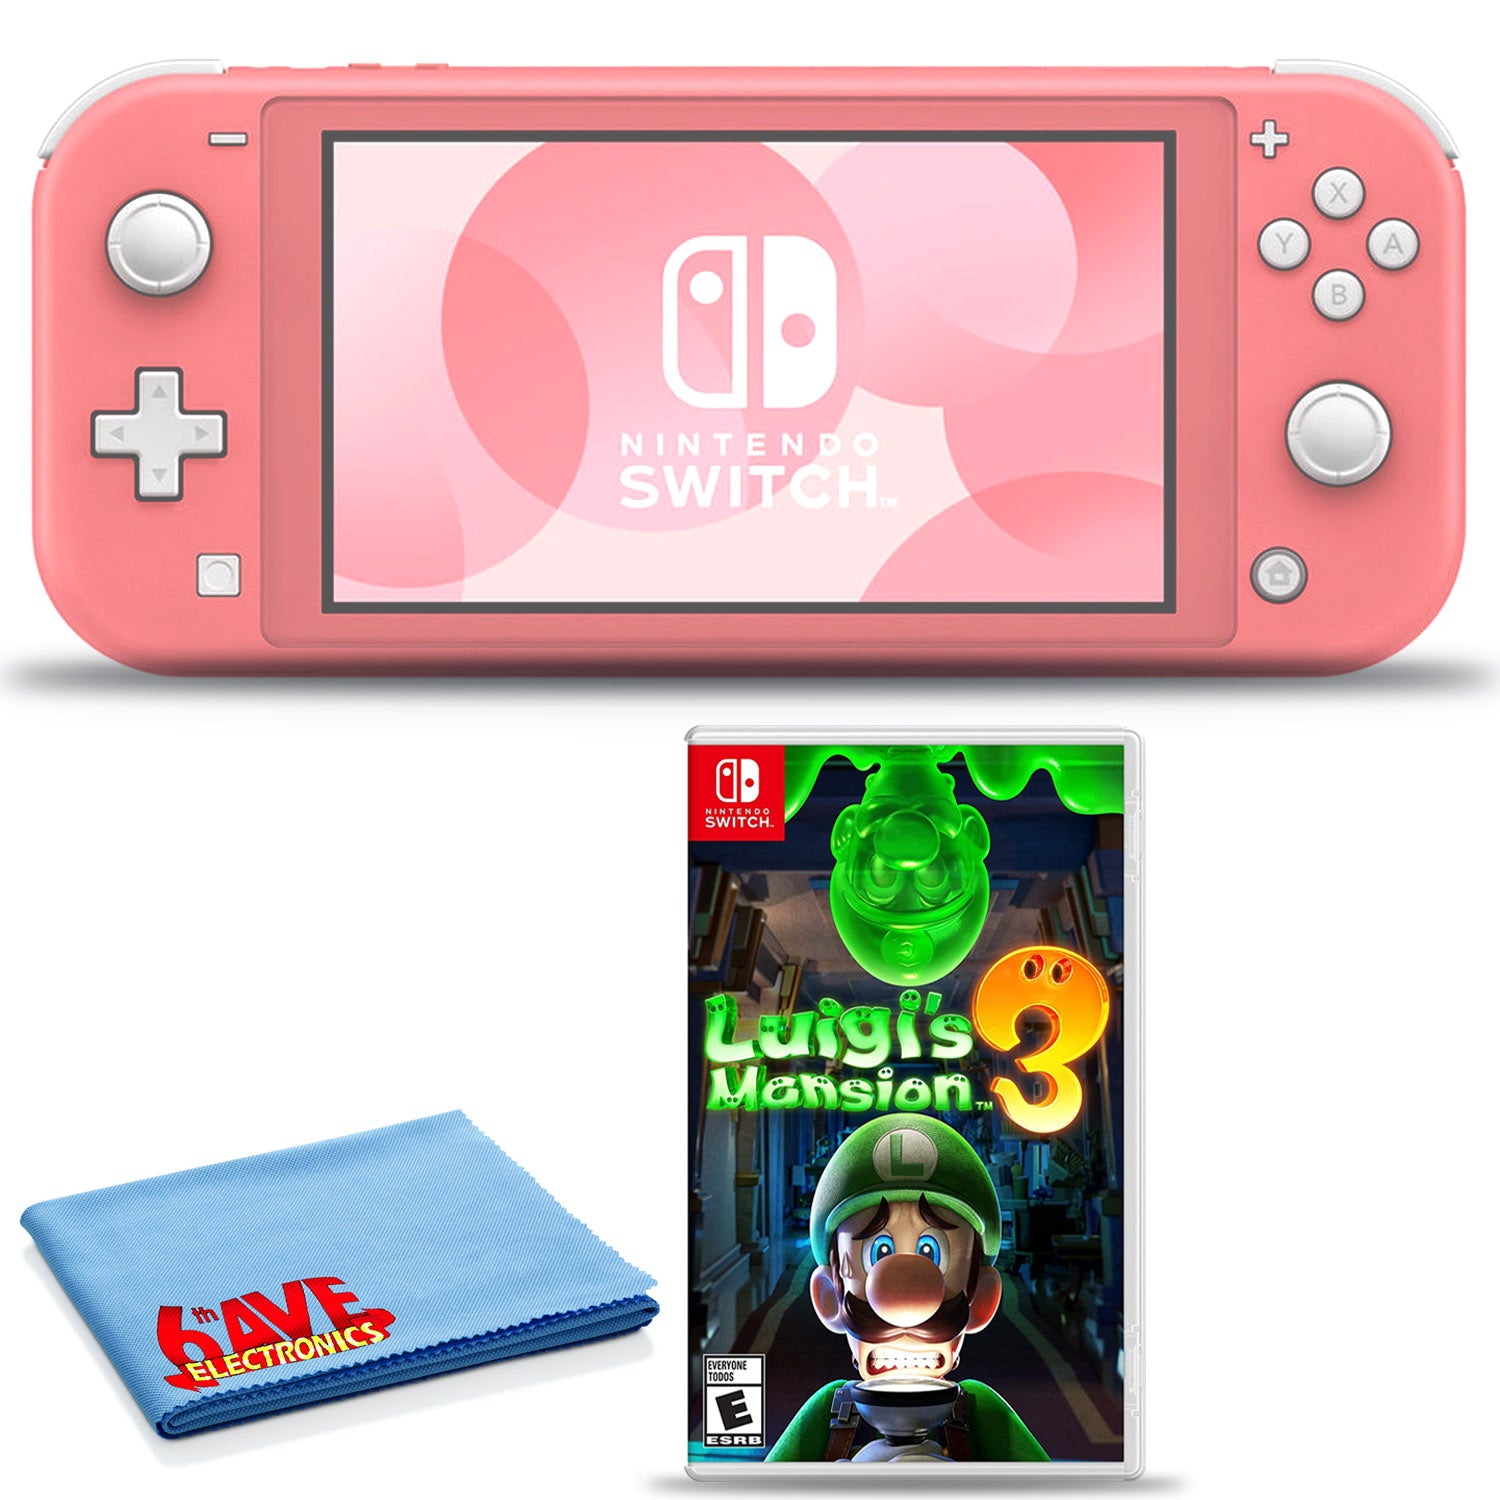 Nintendo Switch Lite Bundle with 6Ave Cleaning Cloth and Luigi's Mansion 3